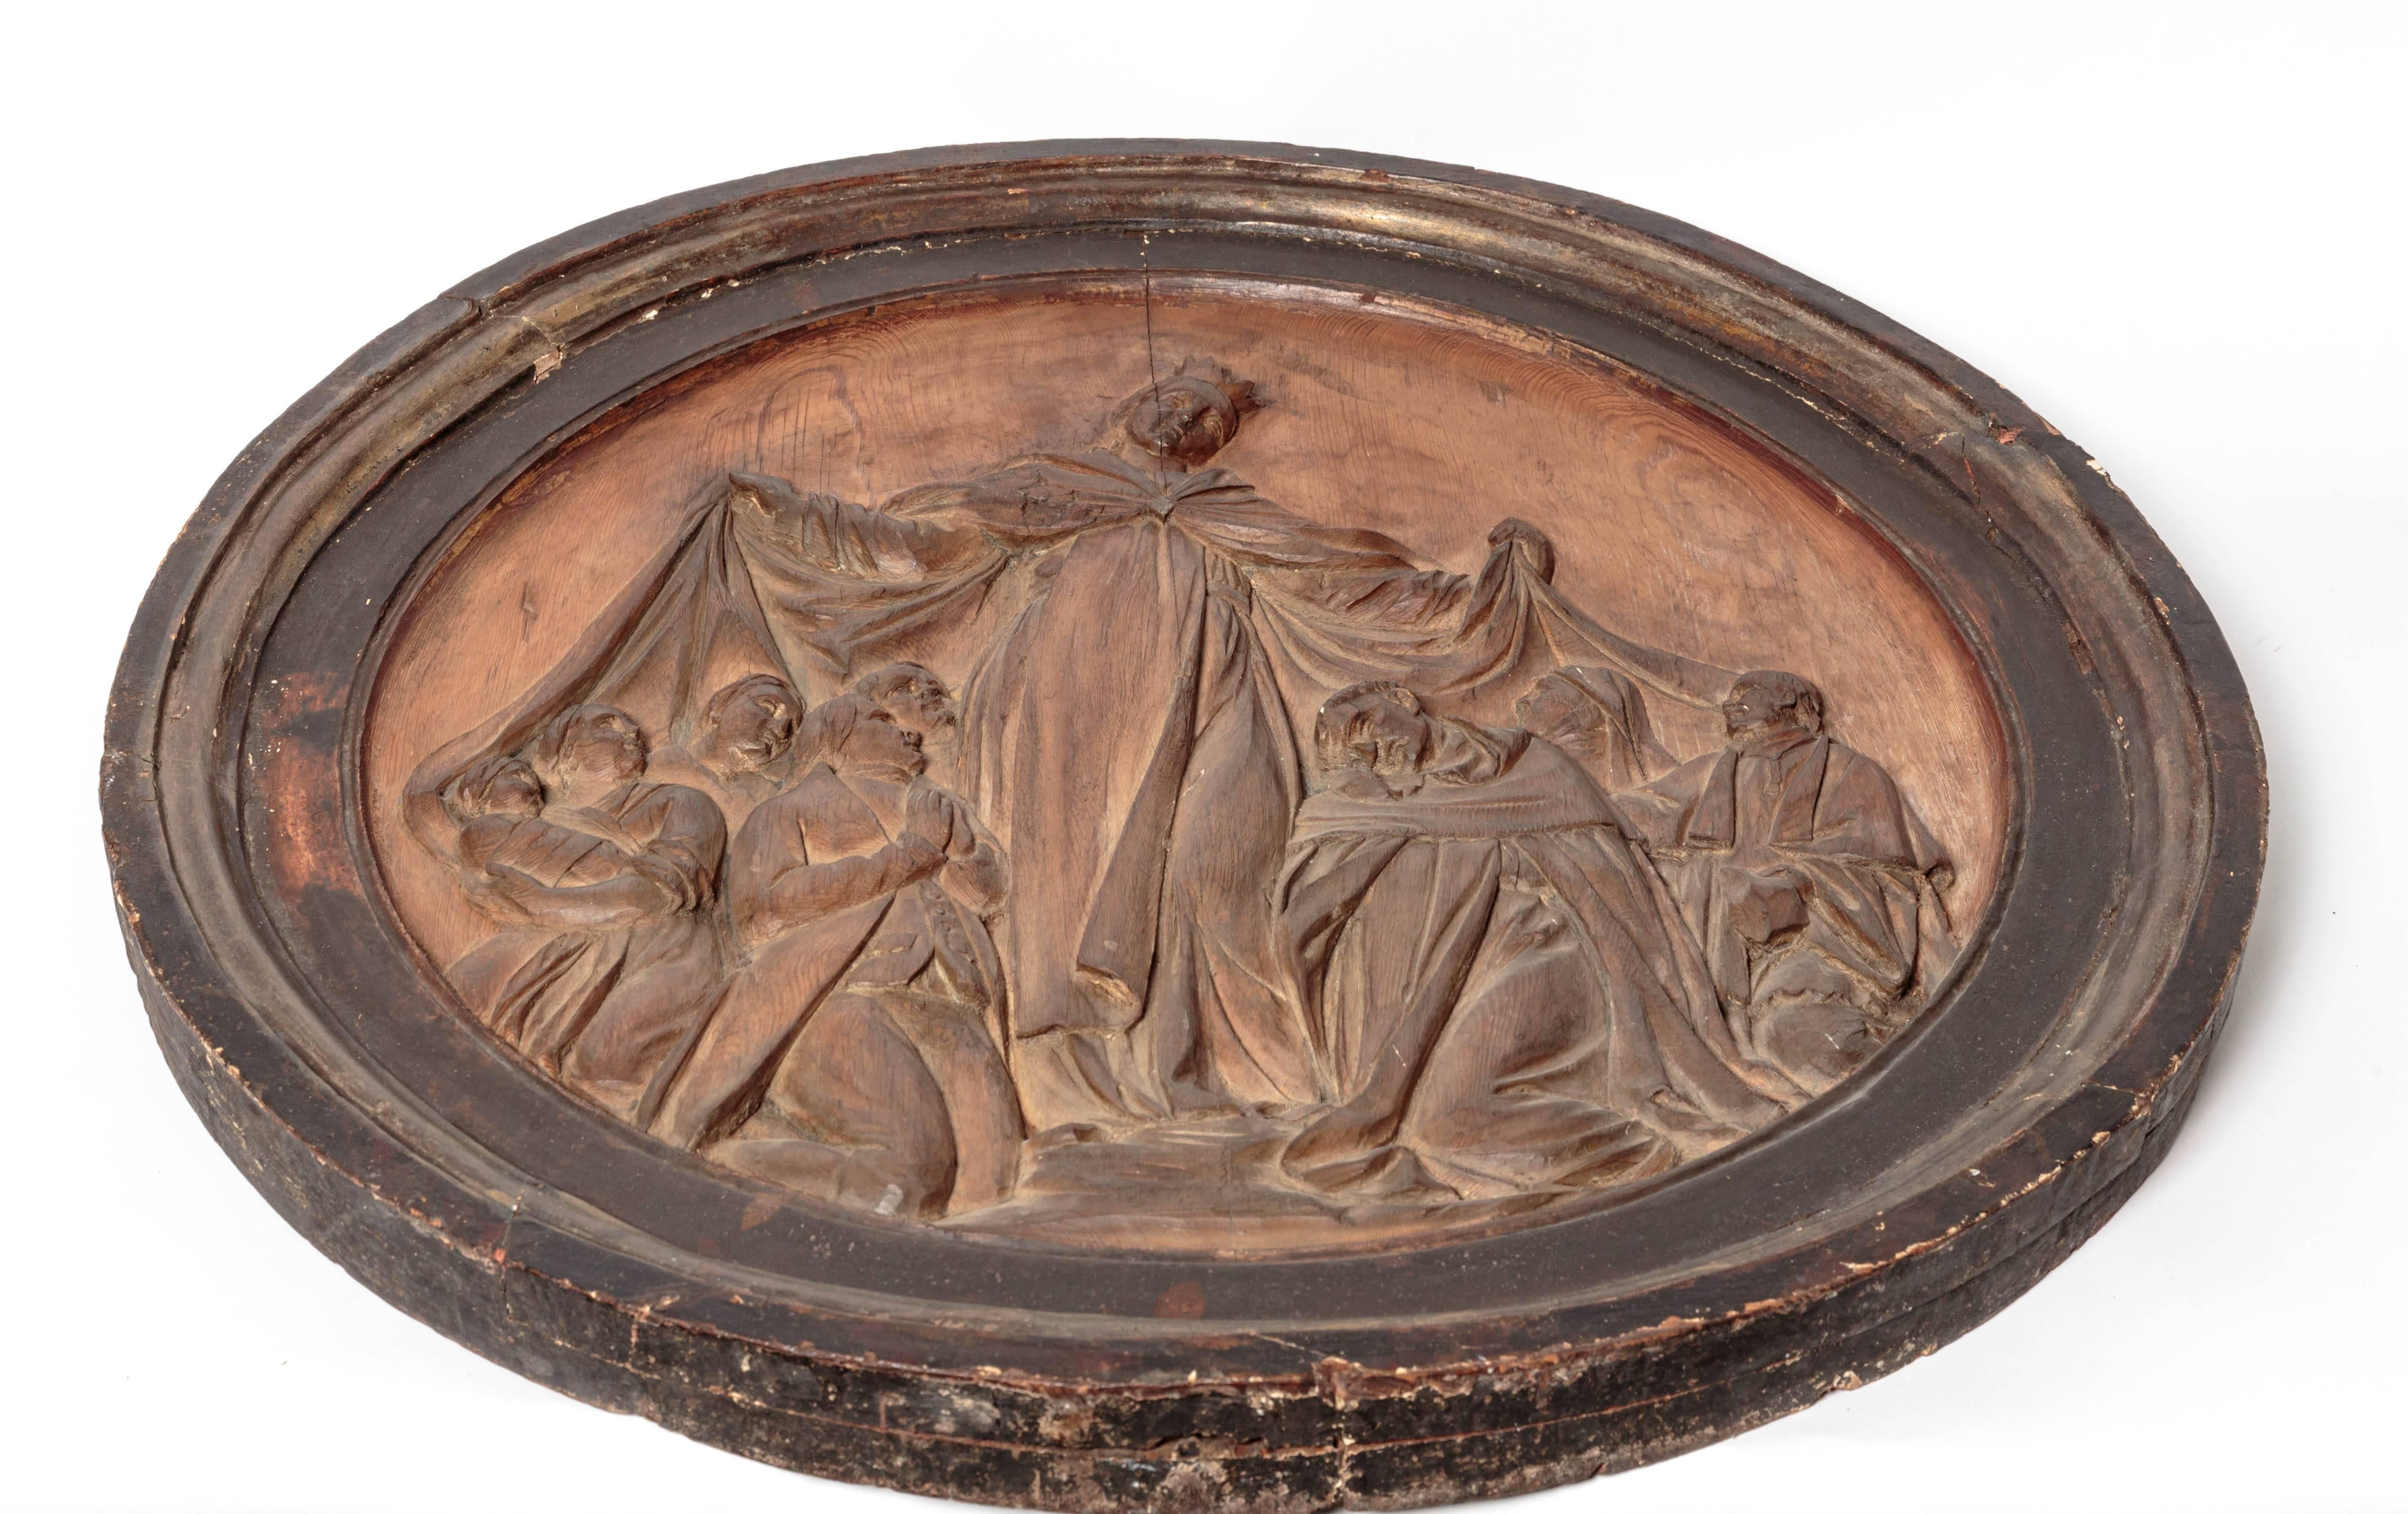 Beautiful hand-carved religious artifact depicting Virgin Mary surrounded by church and state. Base relief form finishing in round frame. Stunning piece.